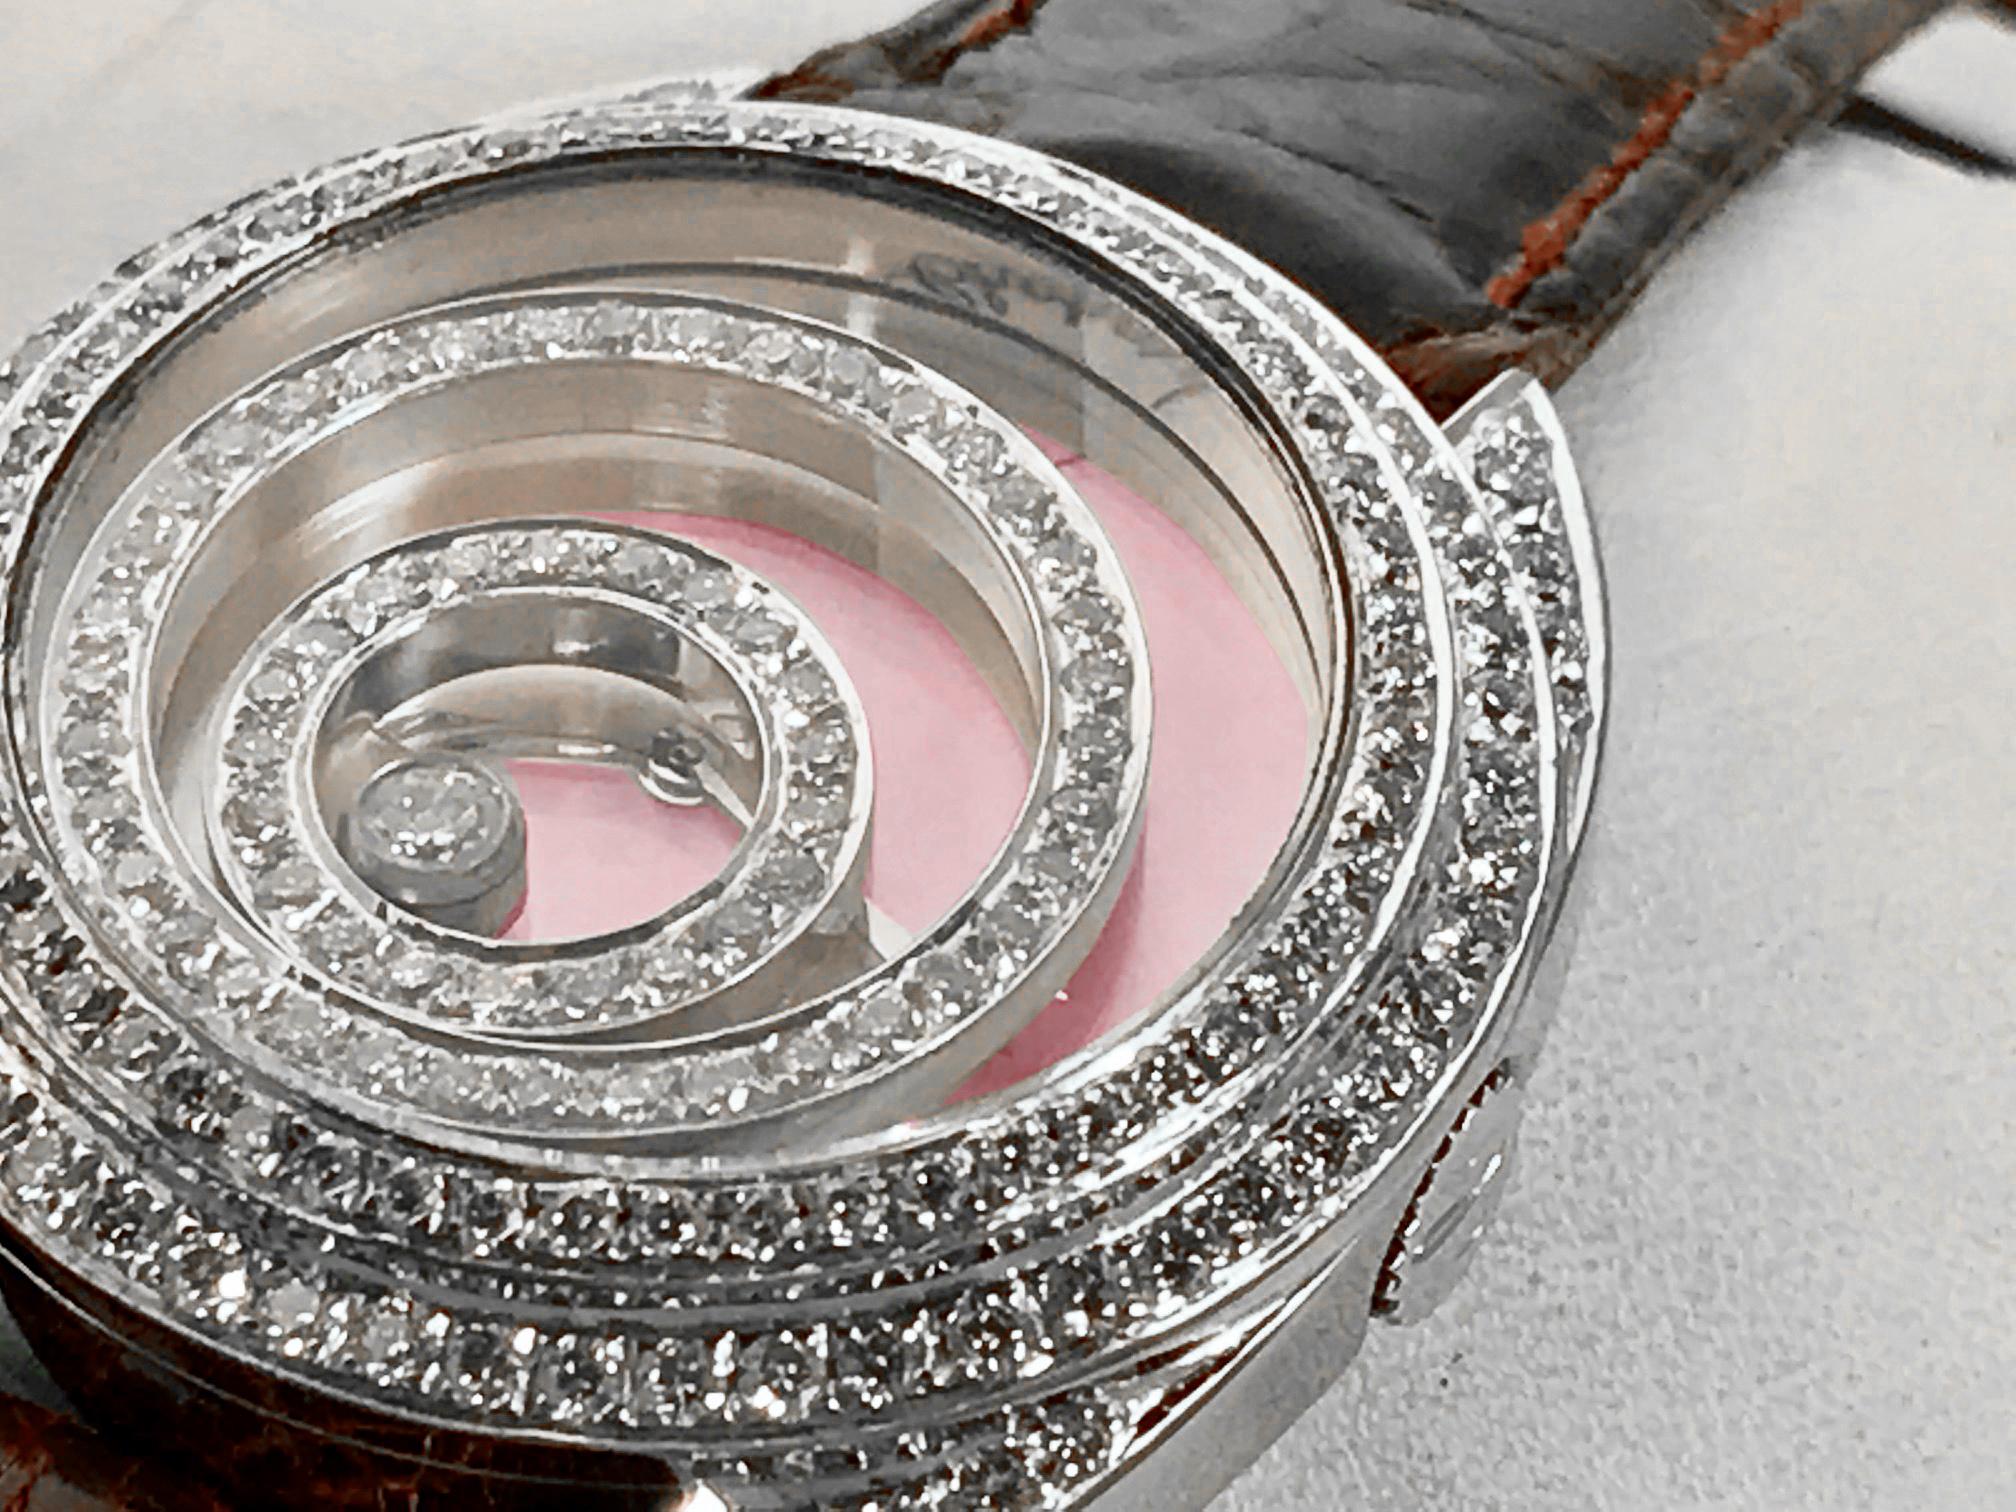 This absolutely gorgeous Chopard Happy Spirit ladies quartz wrist watch is a visual stunner. The dial is a beautiful light pink mother of pearl and is fitted with a custom floating diamond halo set that all articulate and move while your wrist is in